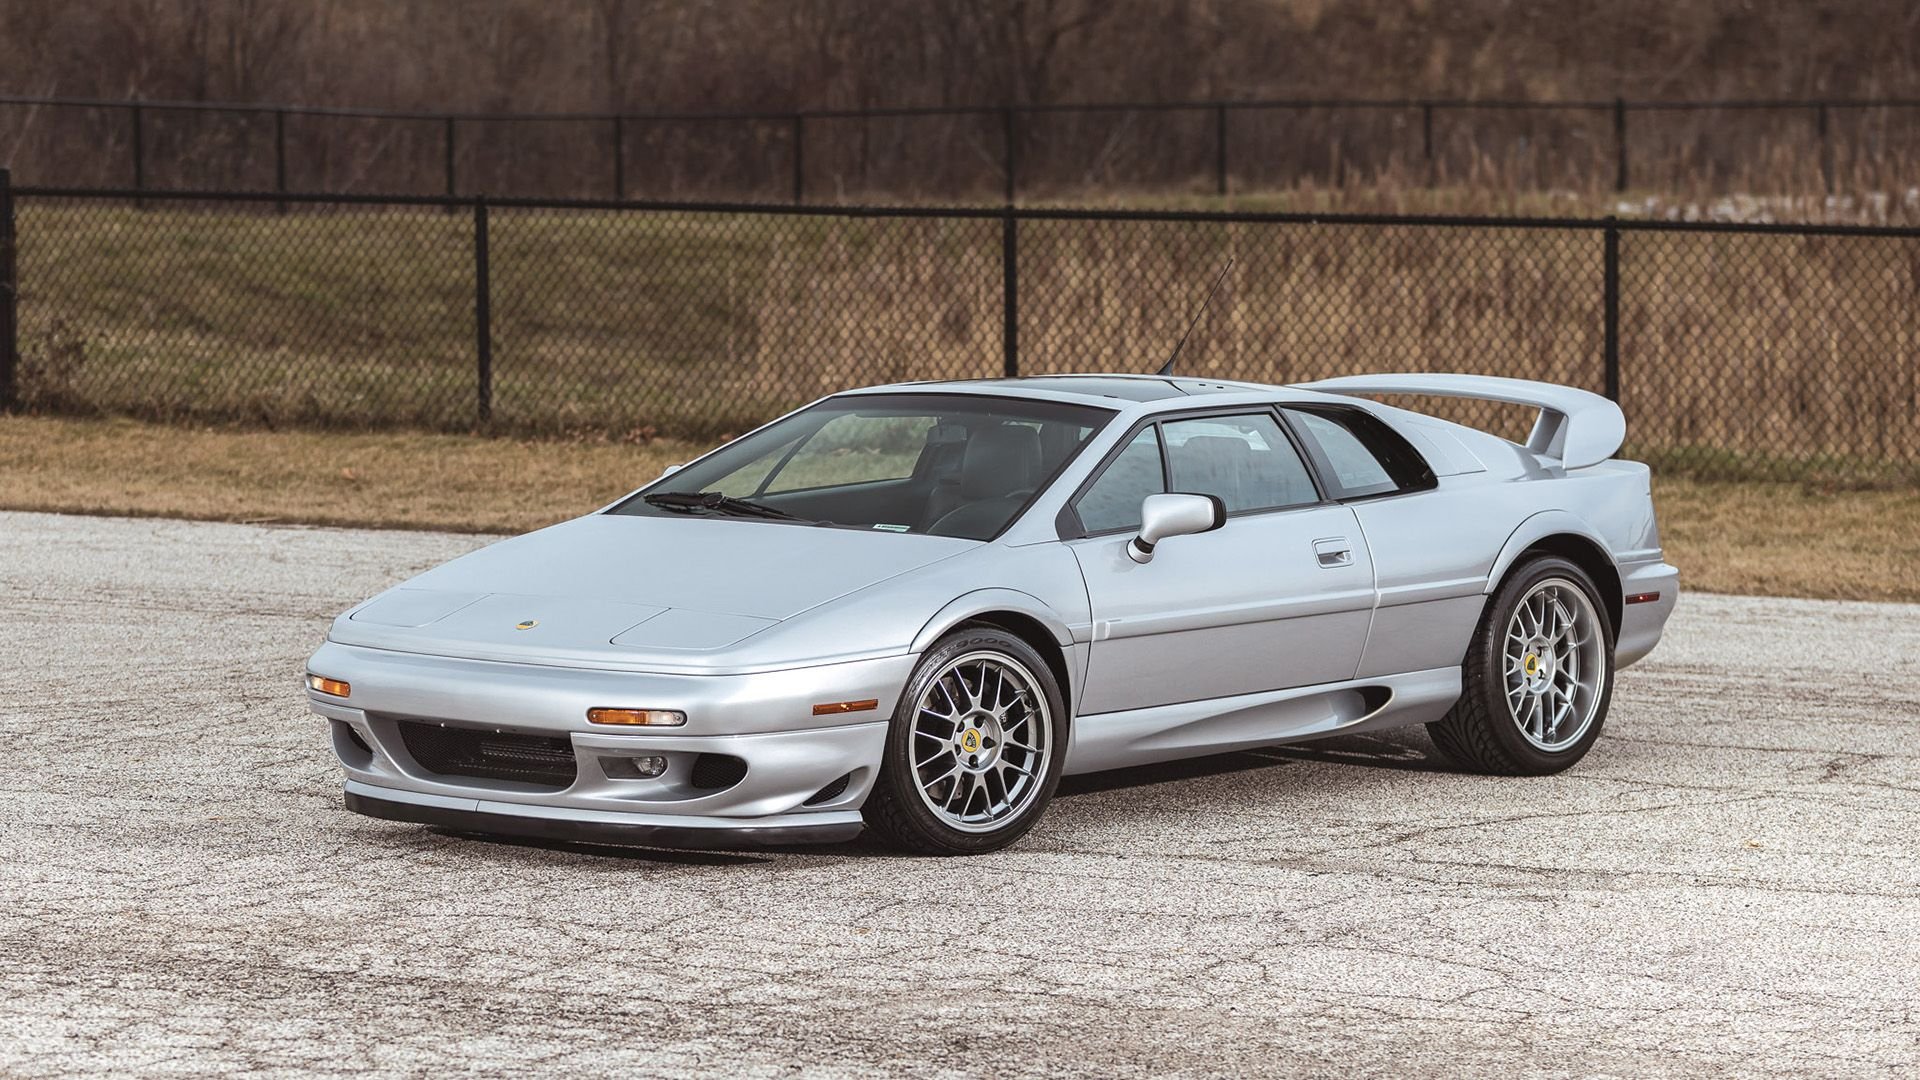 2002 Lotus Esprit V8 25th Anniversary Edition | The Amelia Auction |  Collector Car Auctions | Broad Arrow Auctions